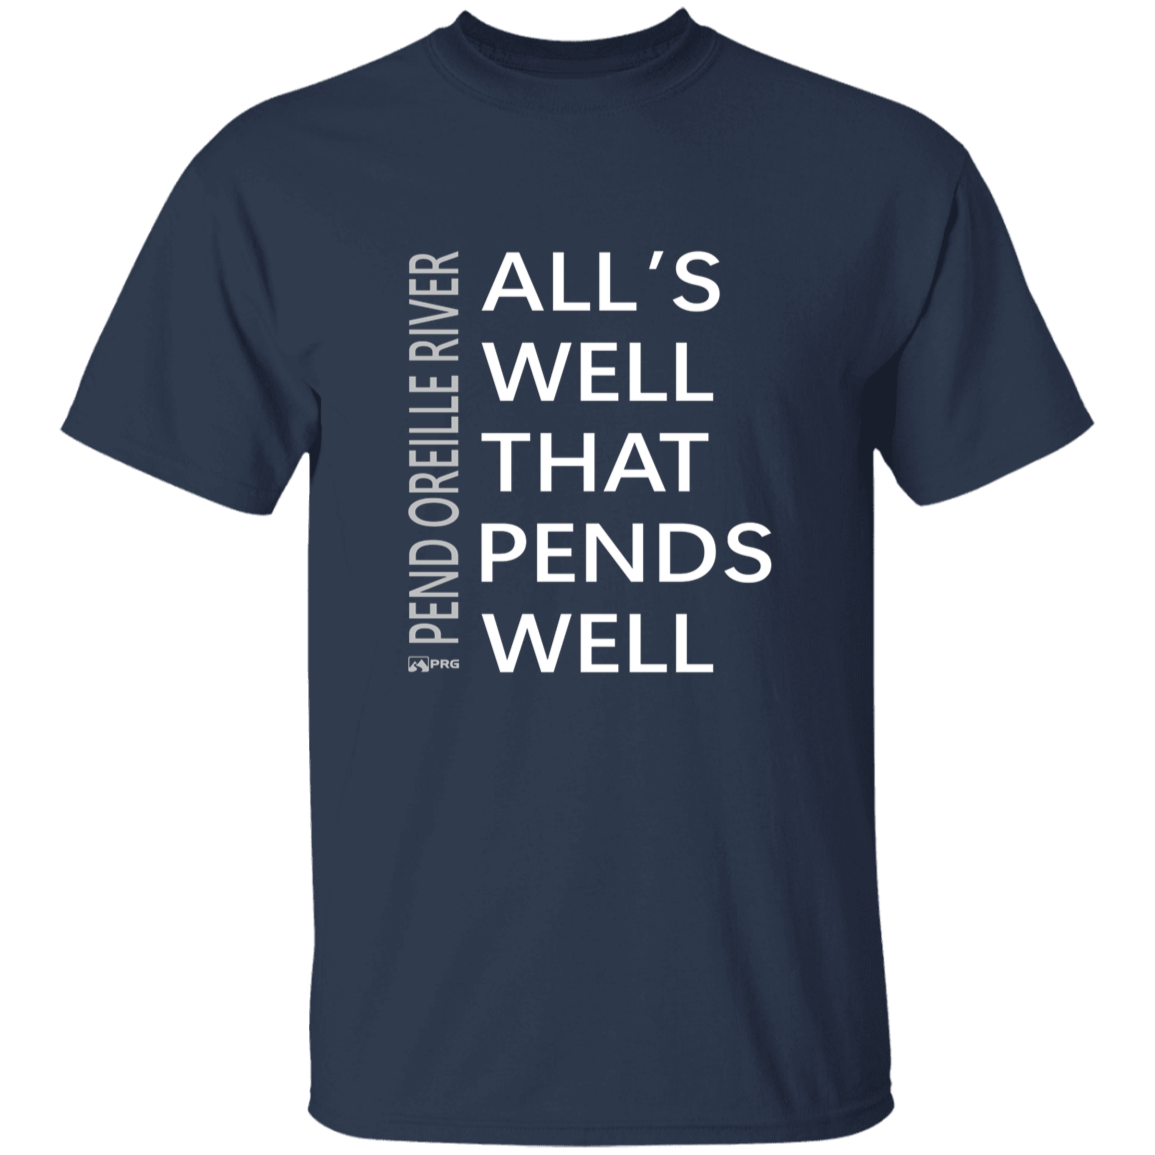 All's Well - Youth Shirt